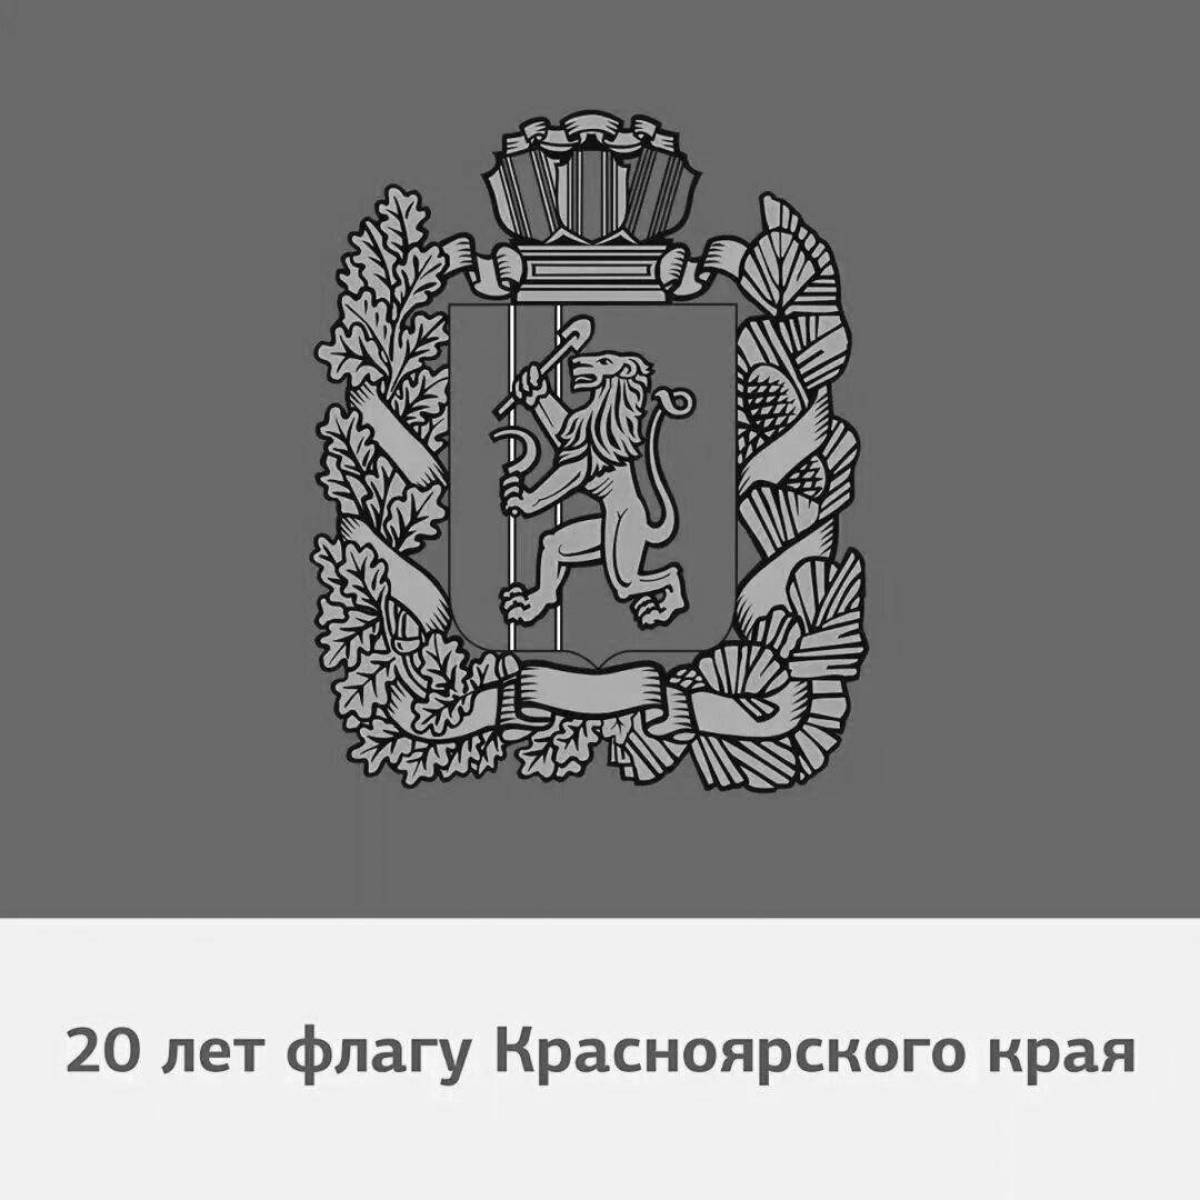 Coloring page magnanimous coat of arms of Krasnoyarsk